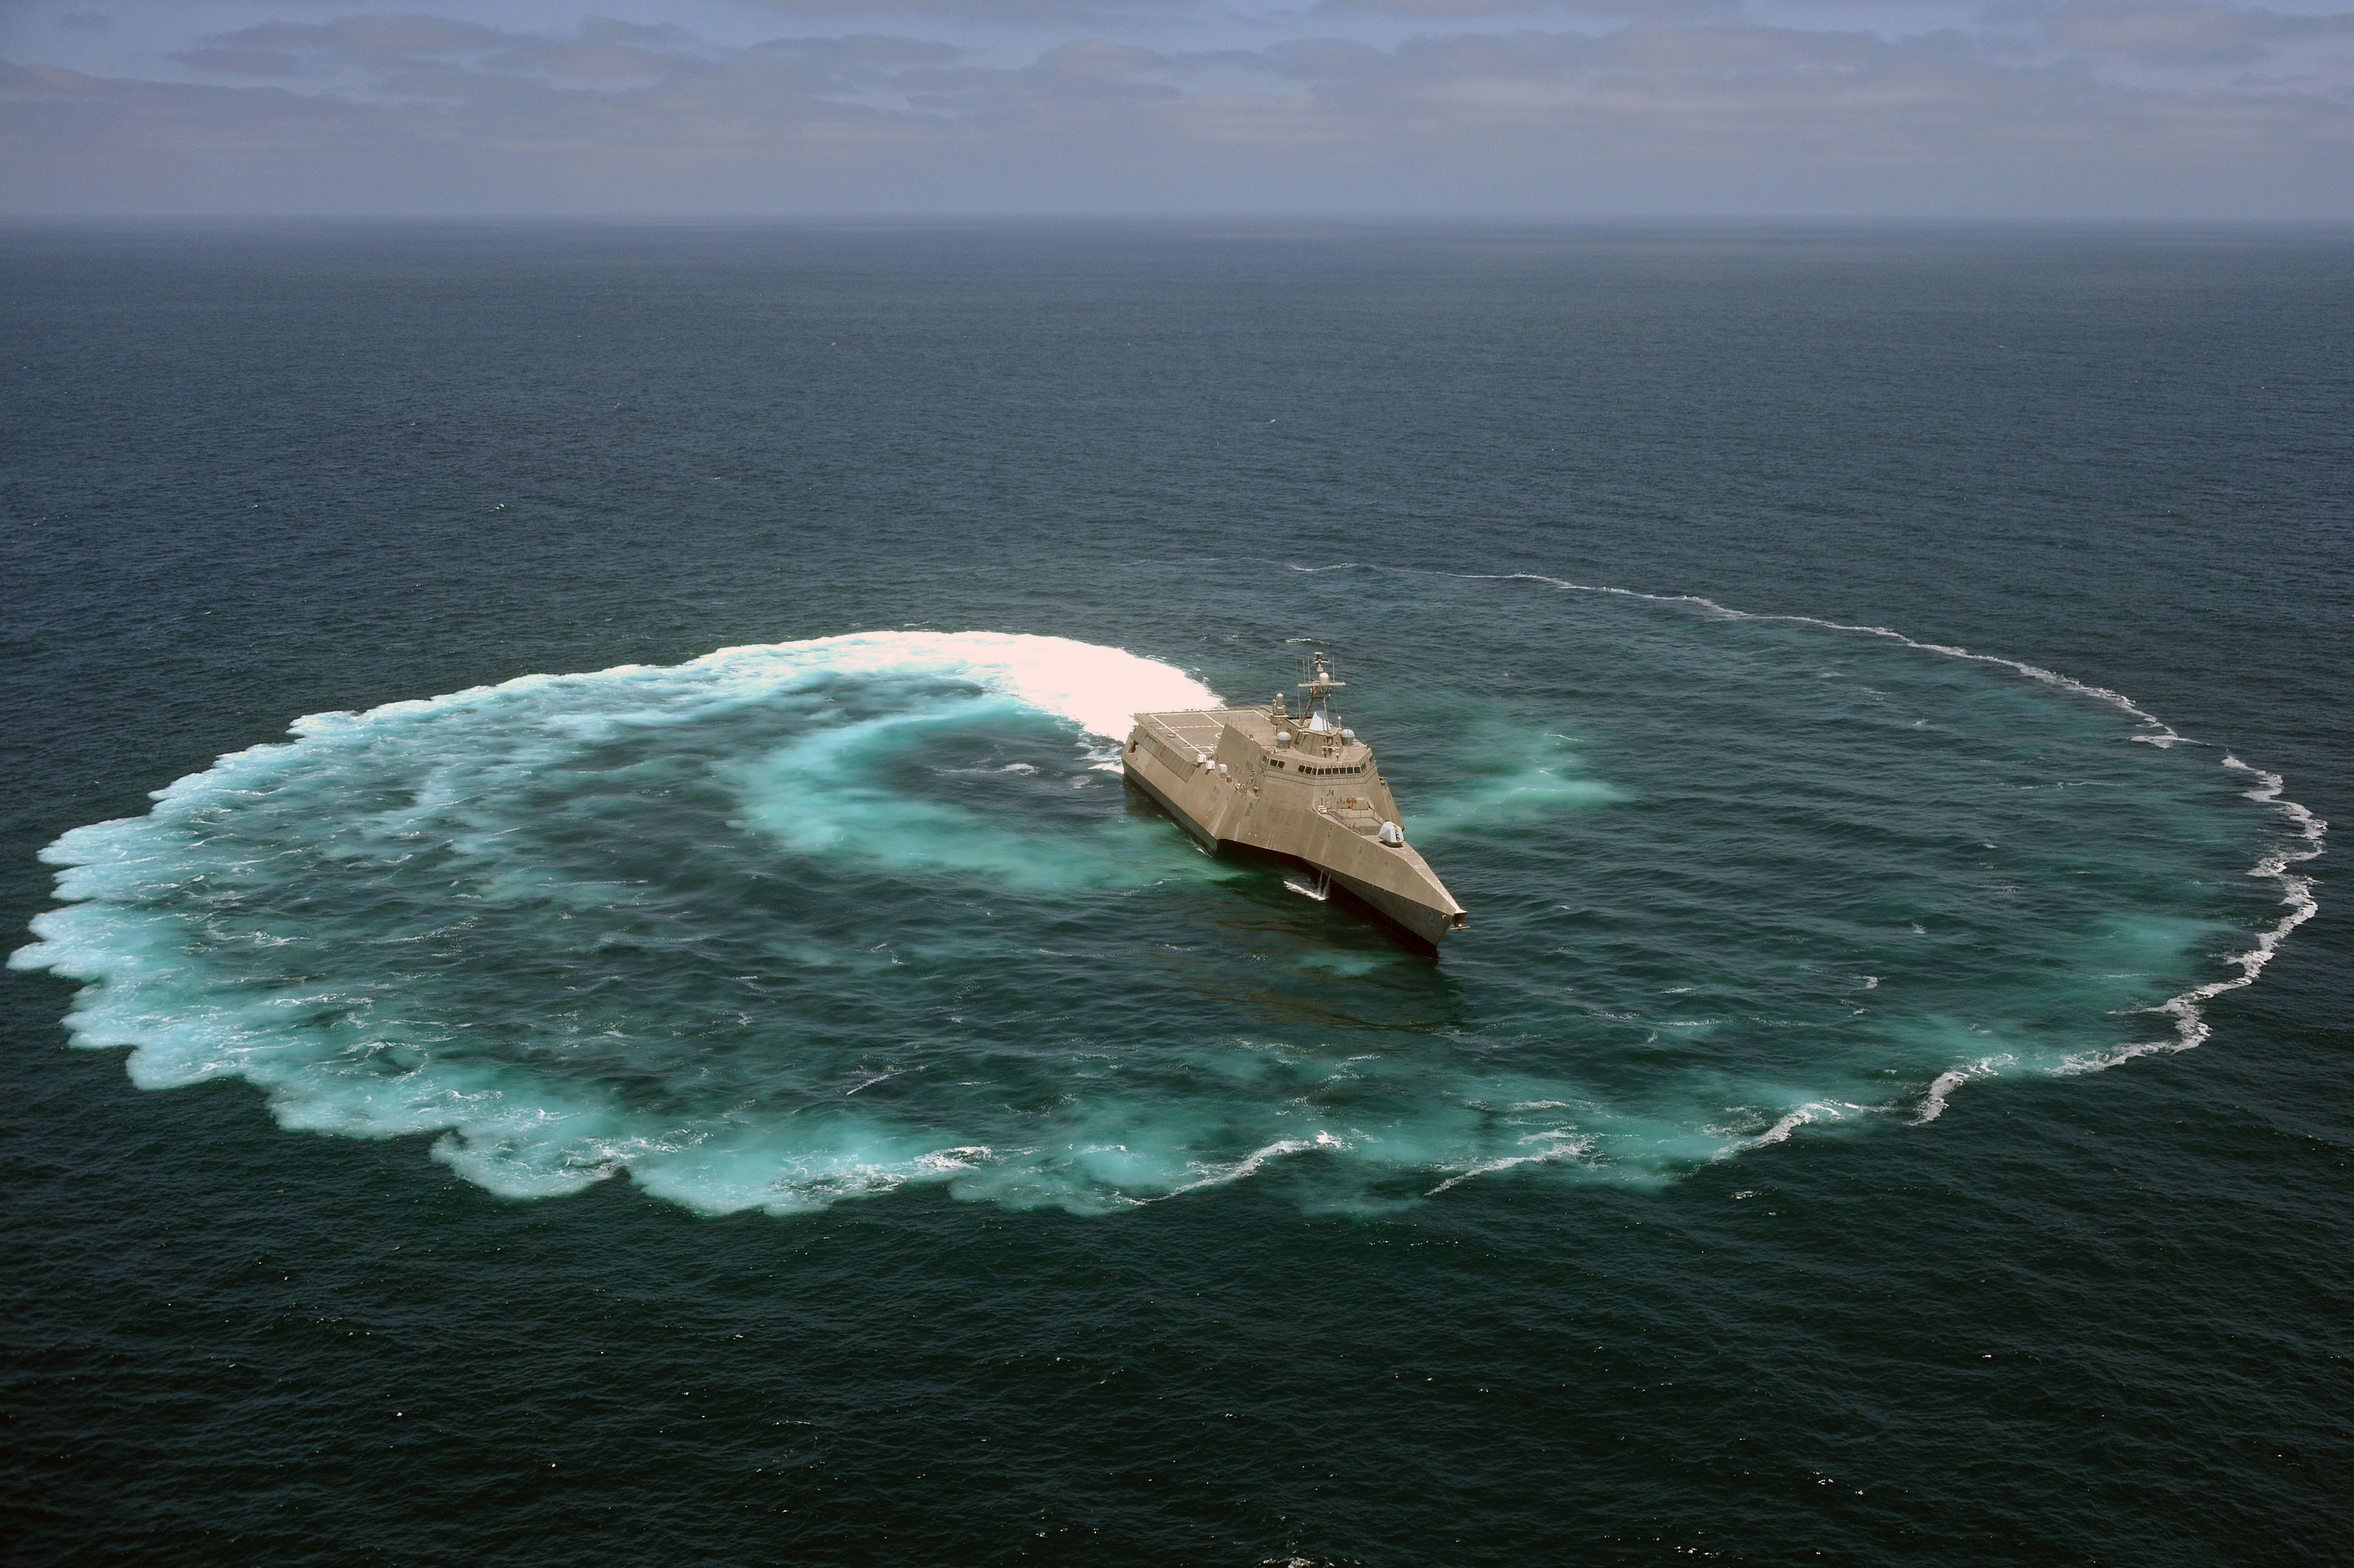 USS_Independence_demonstrates_its_maneuvering_capabilities.jpg